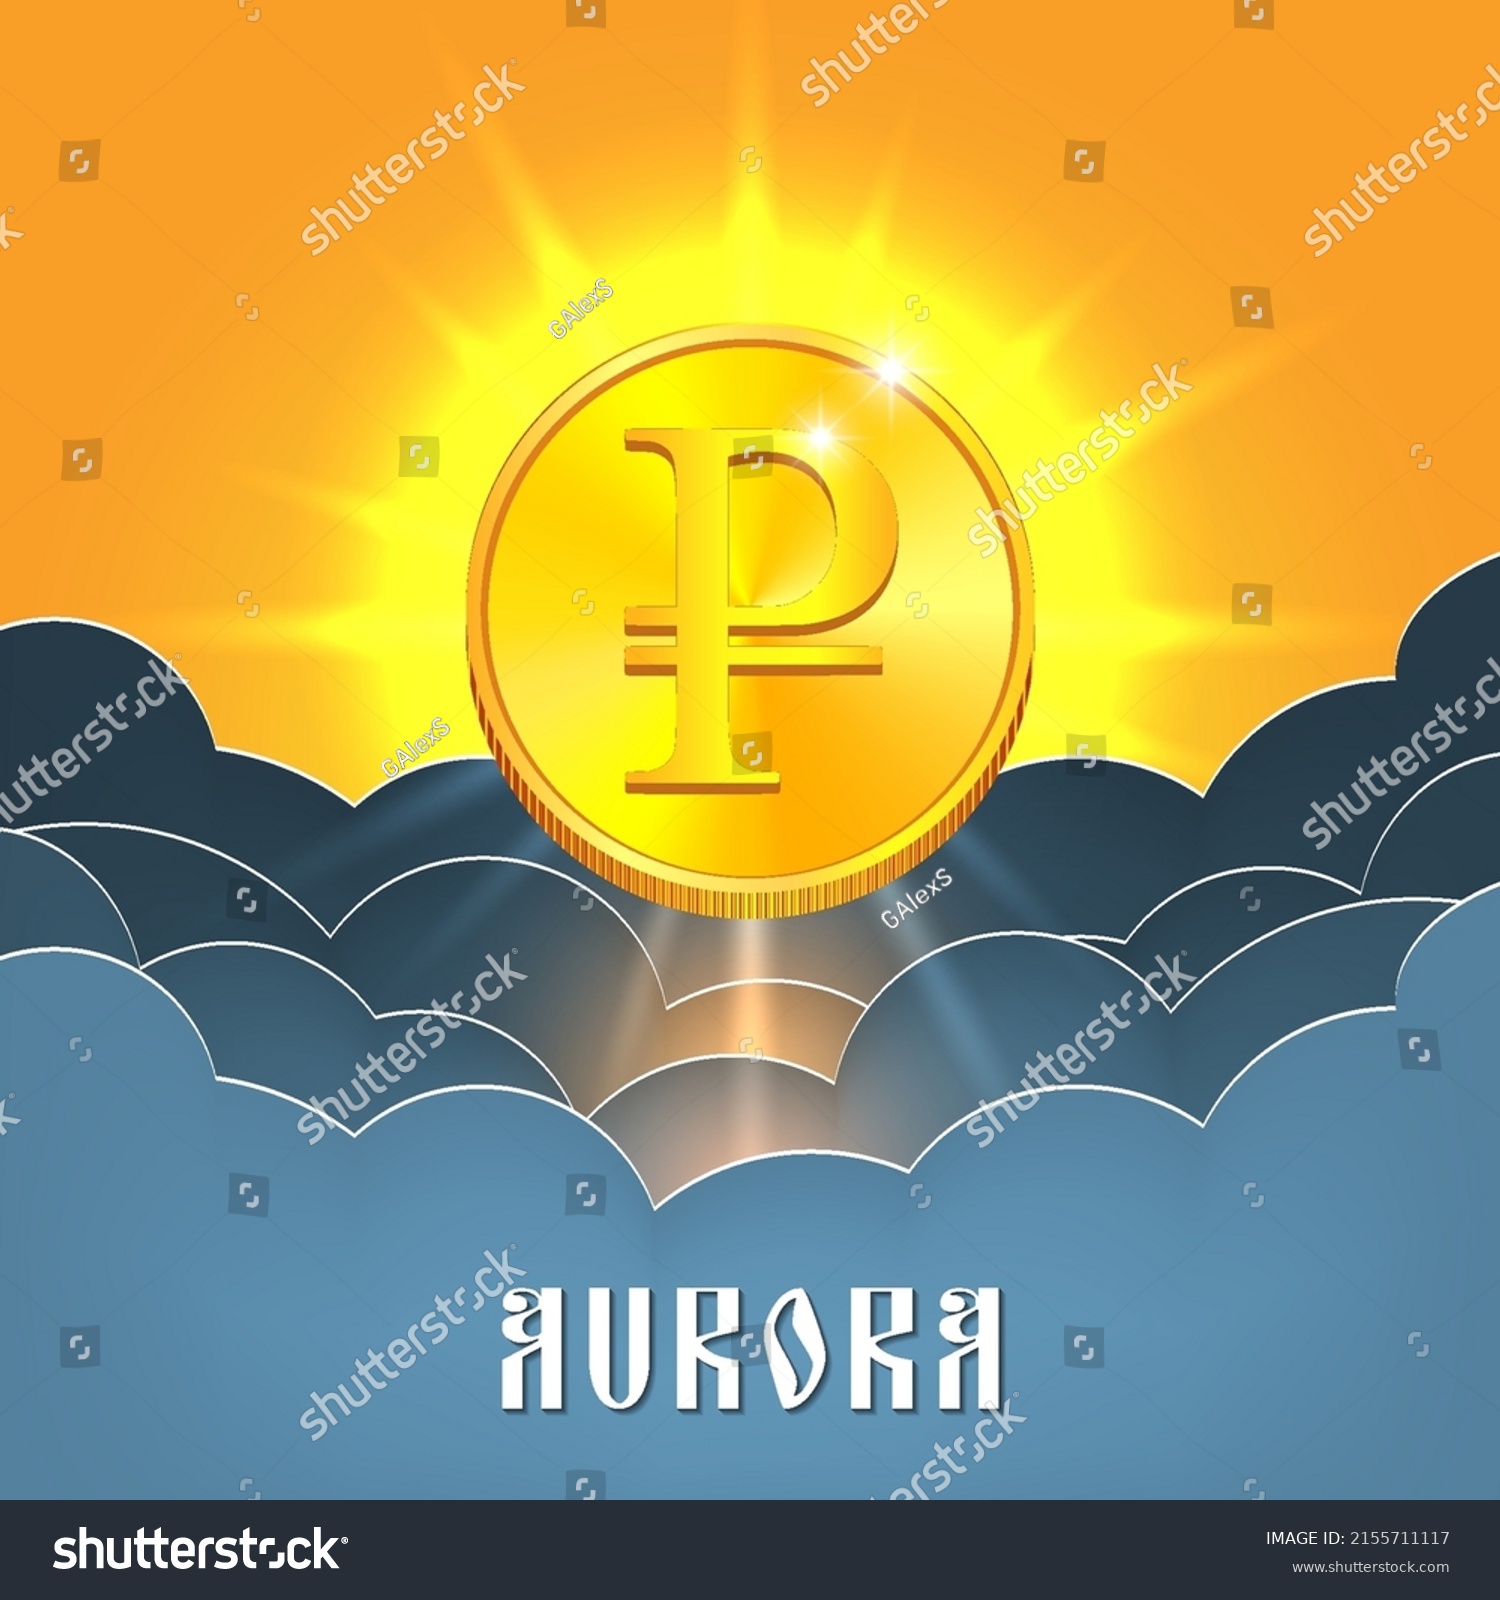 SVG of Vector financial poster. The Russian ruble coin rises above the clouds in bright rays. Aurora inscription svg